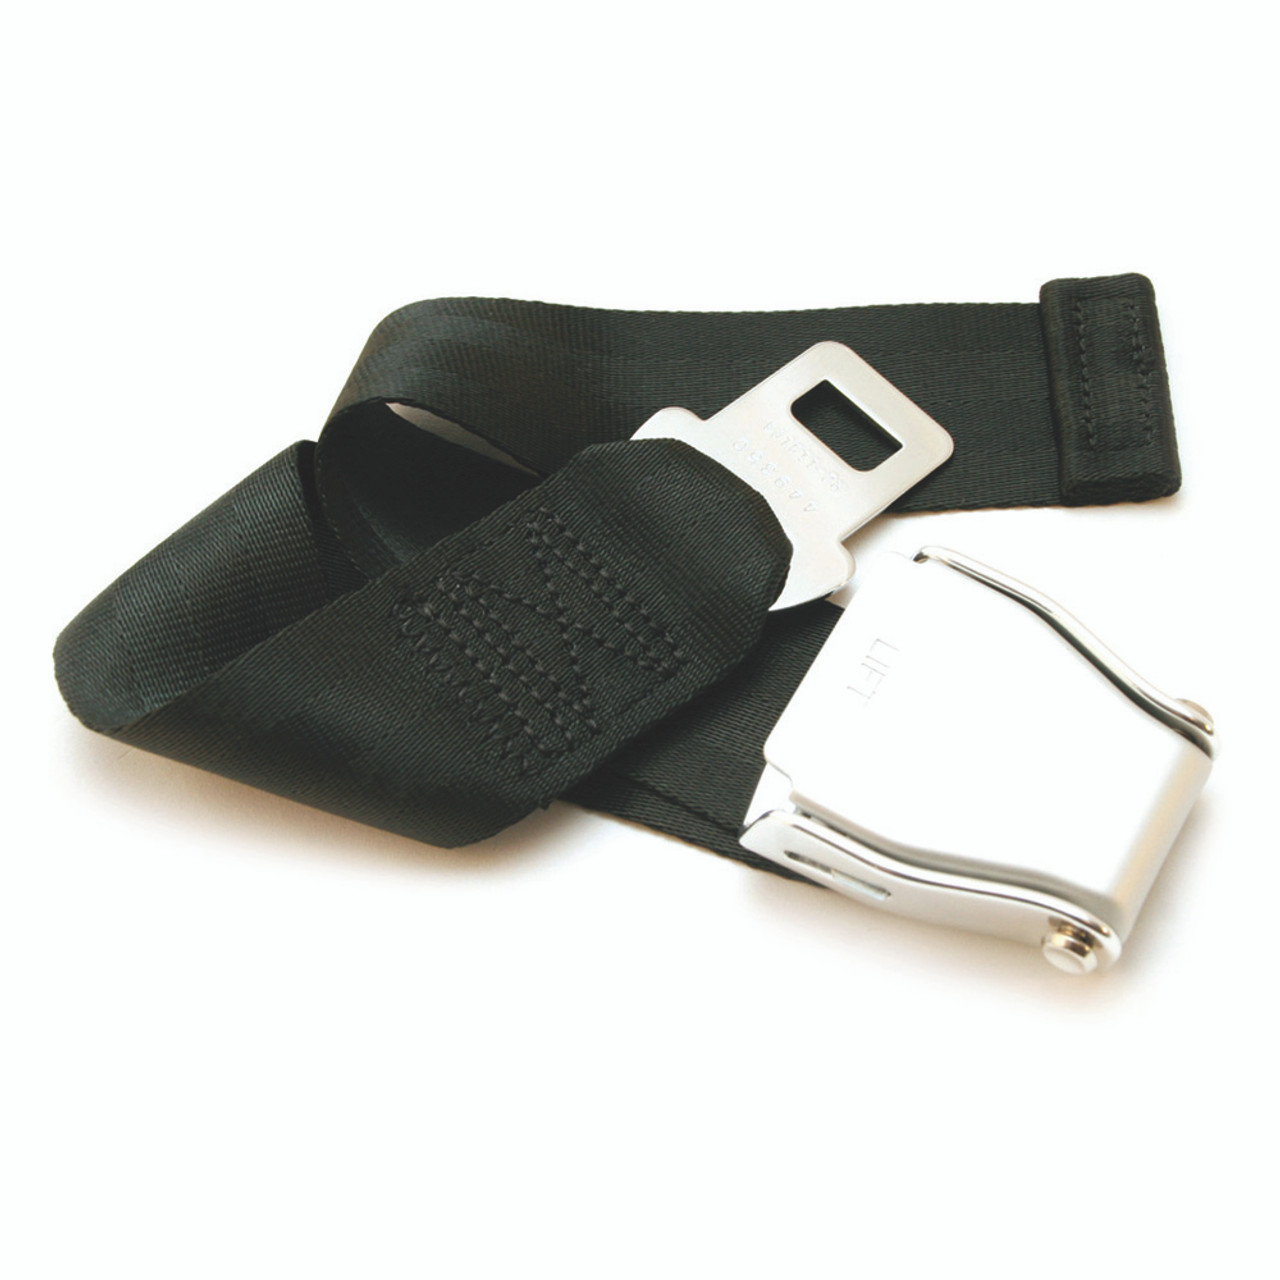 Airplane Seat Belt Extender - E8 Safety Certified